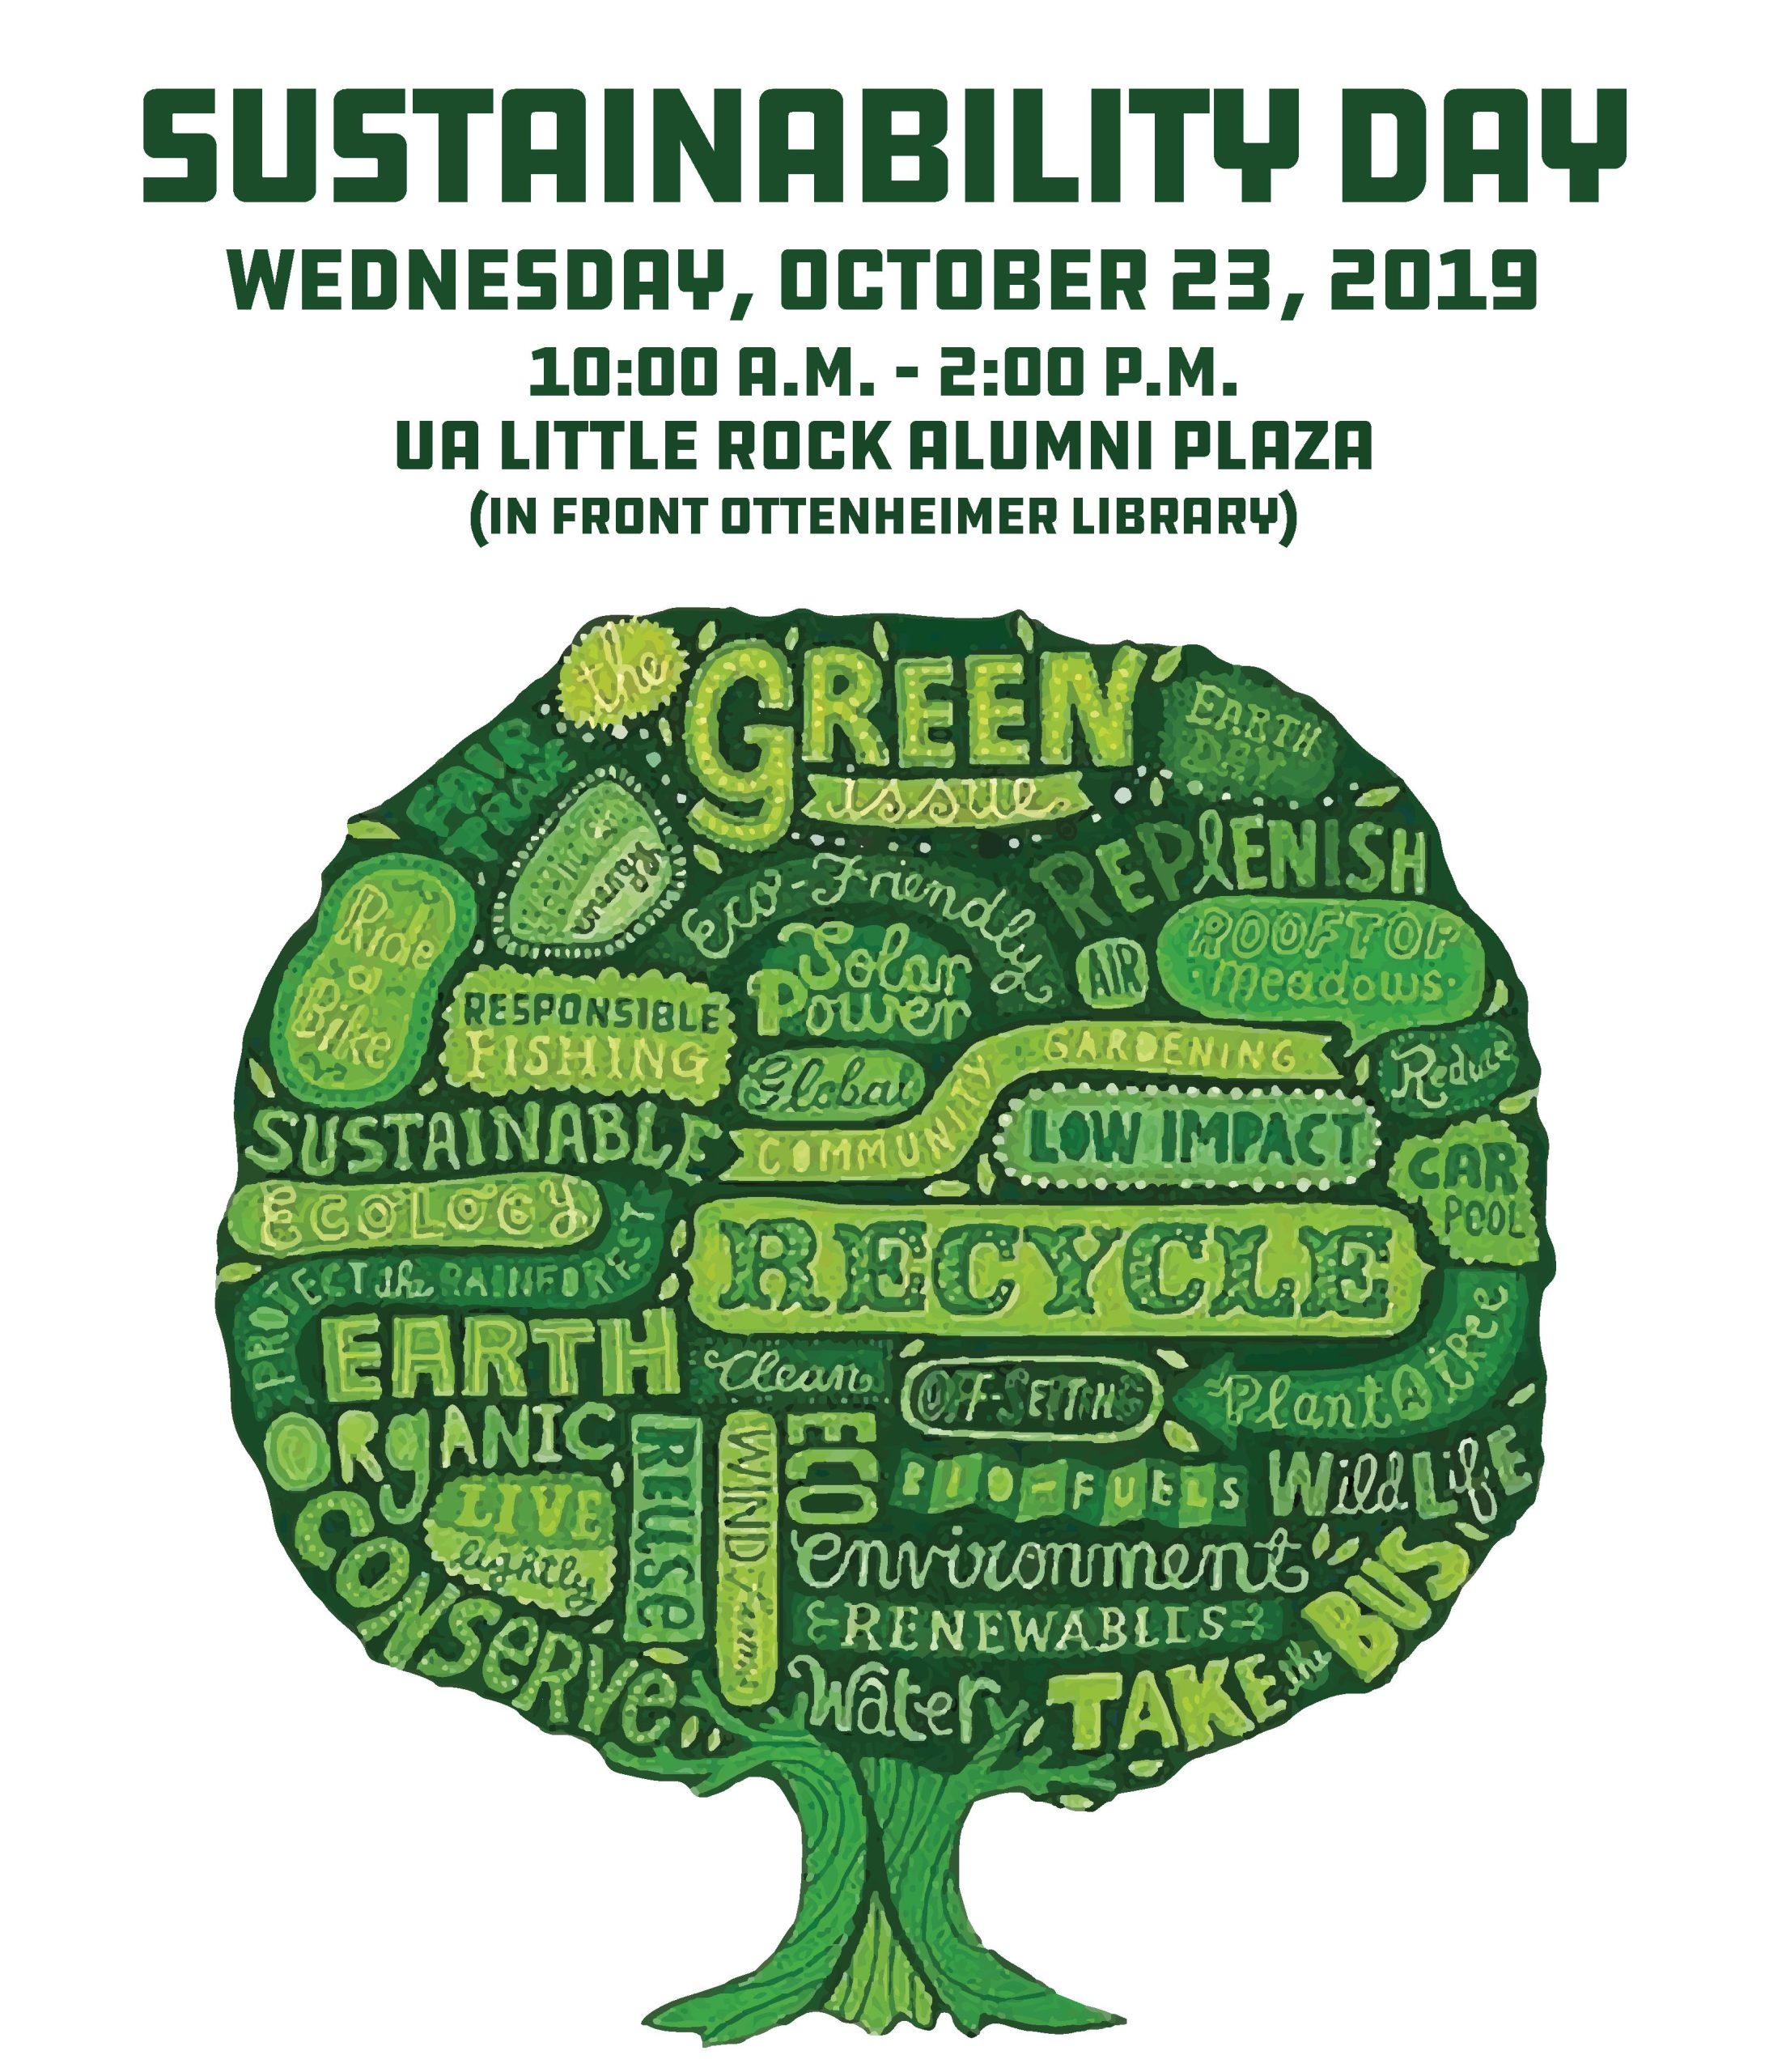 The UA Little Rock campus community is invited to celebrate Sustainability Day from 10 a.m. to 2 p.m. Wednesday, October 23, in Alumni Plaza, the area in front of Ottenheimer Library.